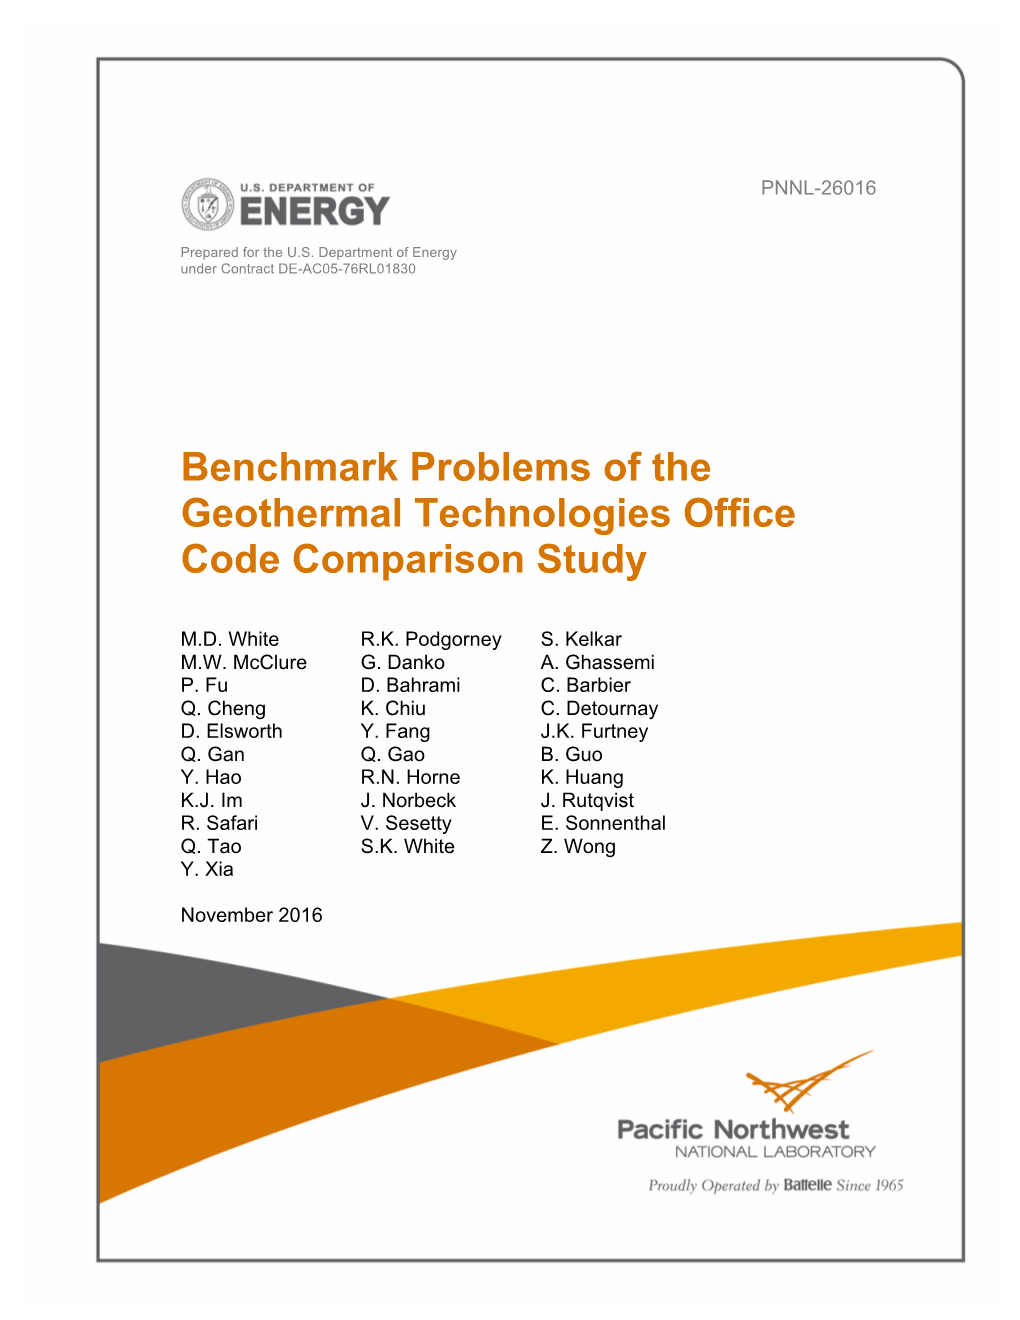 Benchmark Problems of the Geothermal Technologies Office Code Comparison Study